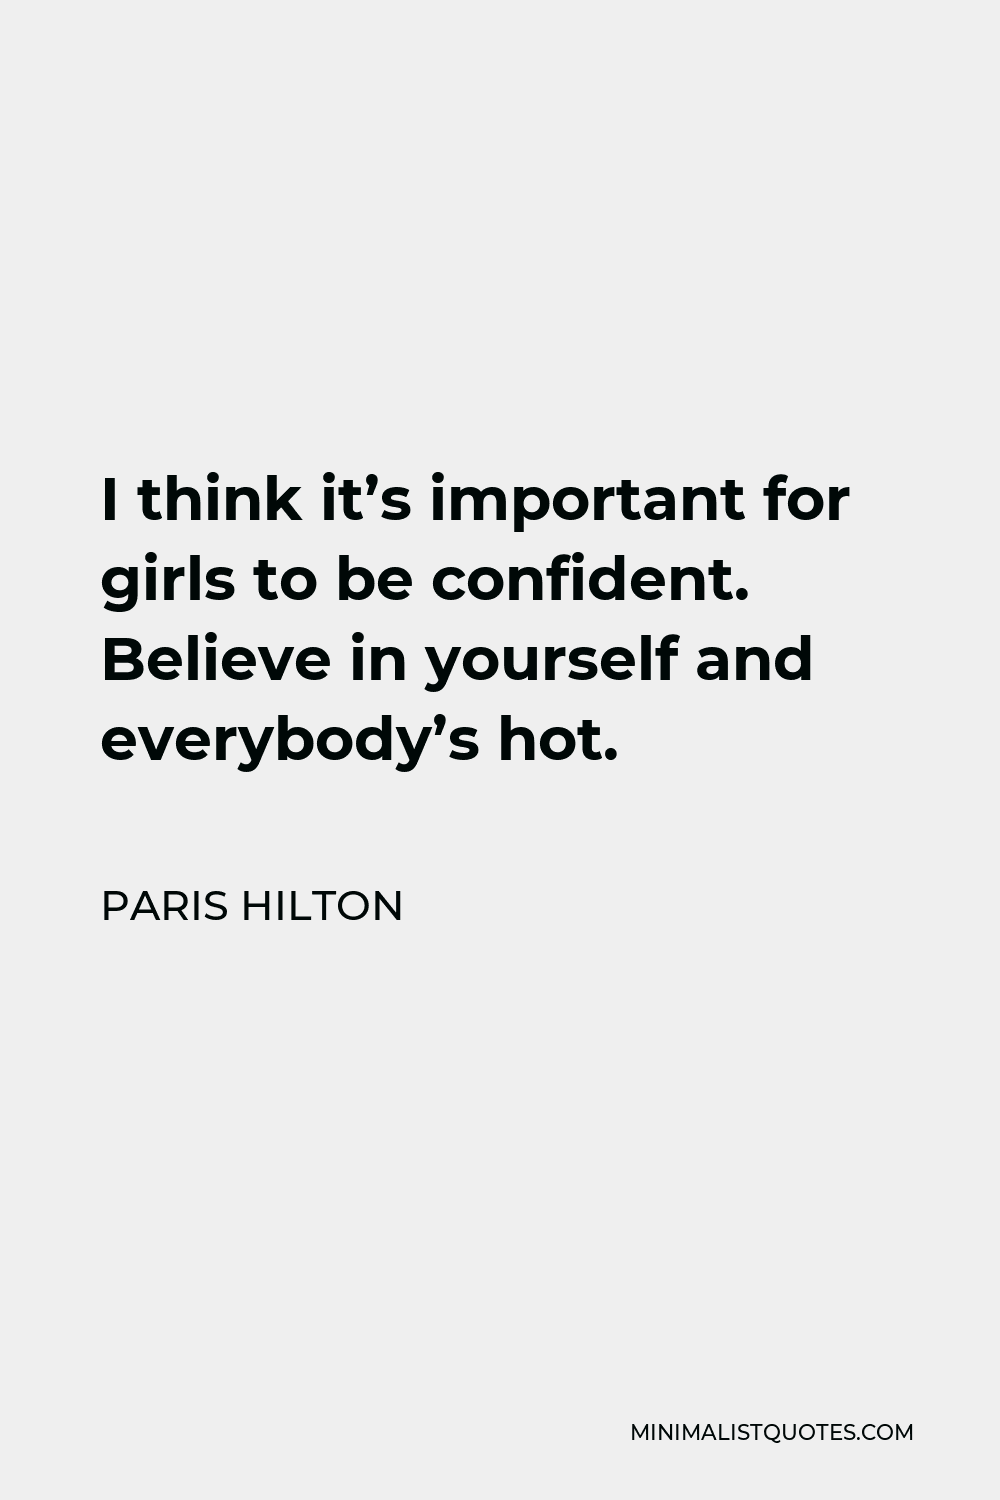 Paris Hilton Quote - I think it’s important for girls to be confident. Believe in yourself and everybody’s hot.